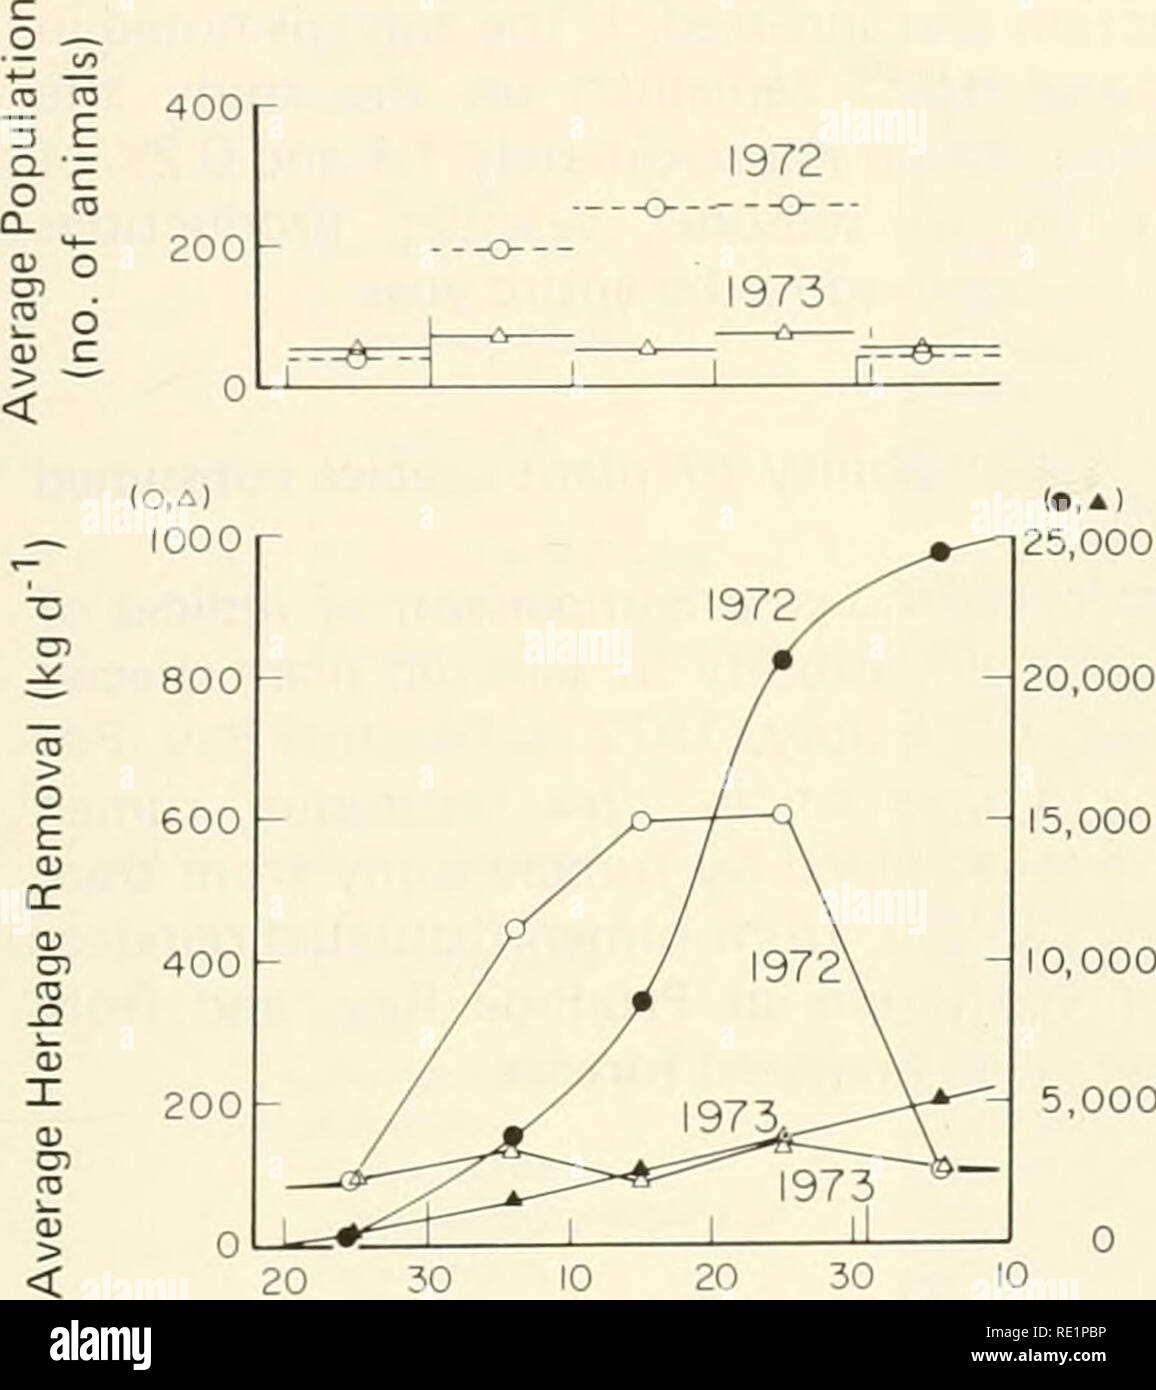 . Ecological investigations of the tundra biome in the Prudhoe Bay region, Alaska. Tundra ecology. 173 1973 as shown in Table 1. Estimates of the cohort and herd dry matter intakes for 1972 and 1973 are shown in Fig. 12. Thus, in 1972 when the average population on the study area was 155 animals, an estimated 25,000 kg of dry matter was consumed during the study period (21 June to 10 August). In 1973, the population was considerably lower, averaging 55 animals. 1972 -o o-. June 10 20 30 10 July Aug en 0) I 5,000 '^ E o Fig. 12. Predicted cumulative herbage consump- tion by caribou in the Prudh Stock Photo